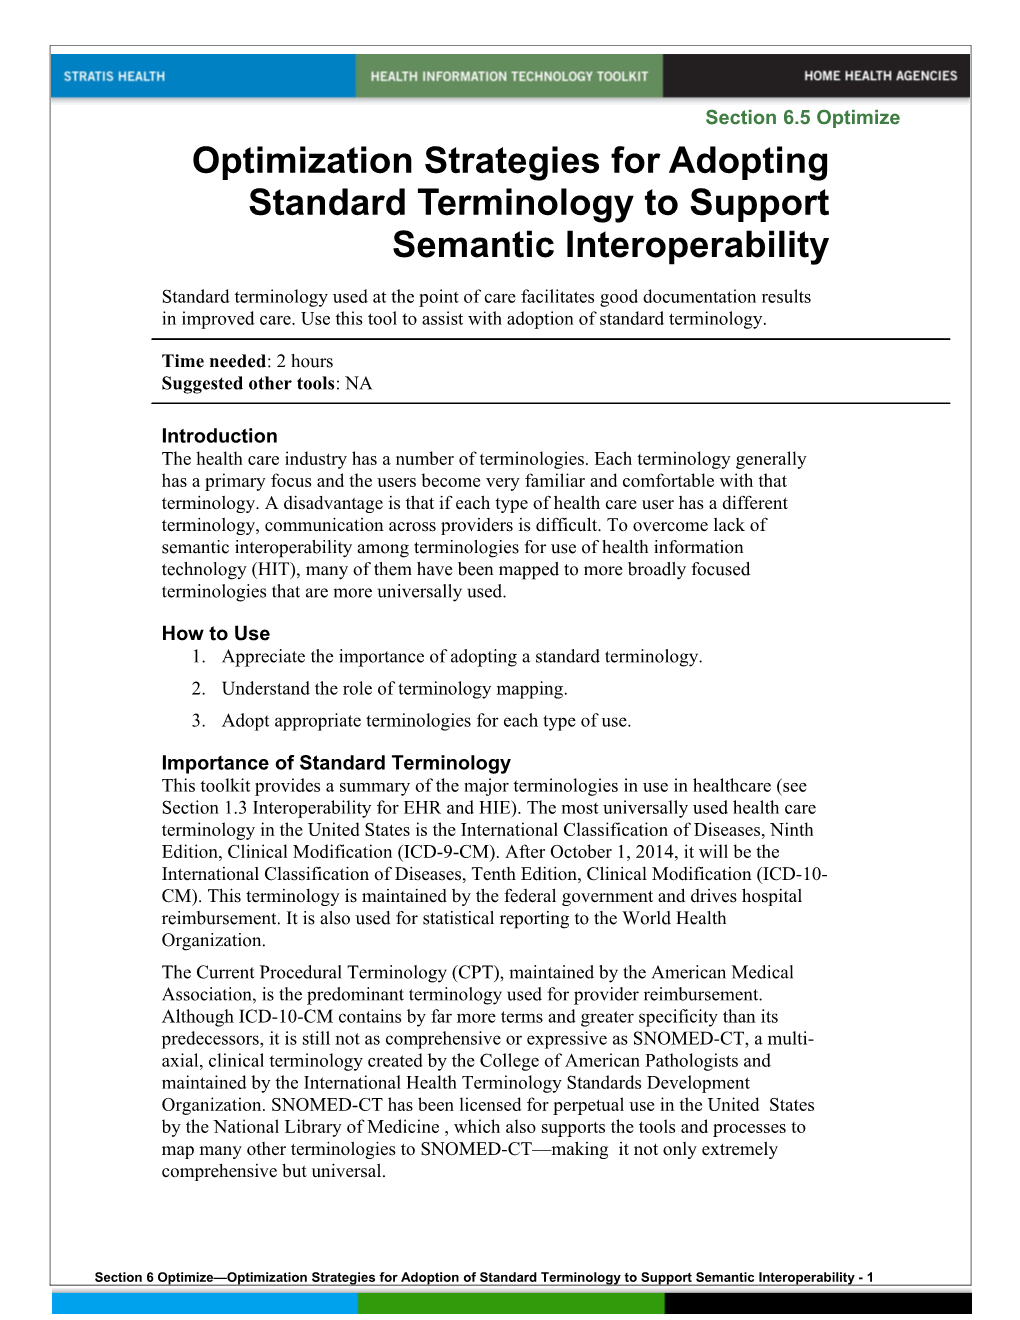 6 Optimization Strategies for Adoption of Standard Terminology to Support Semantic